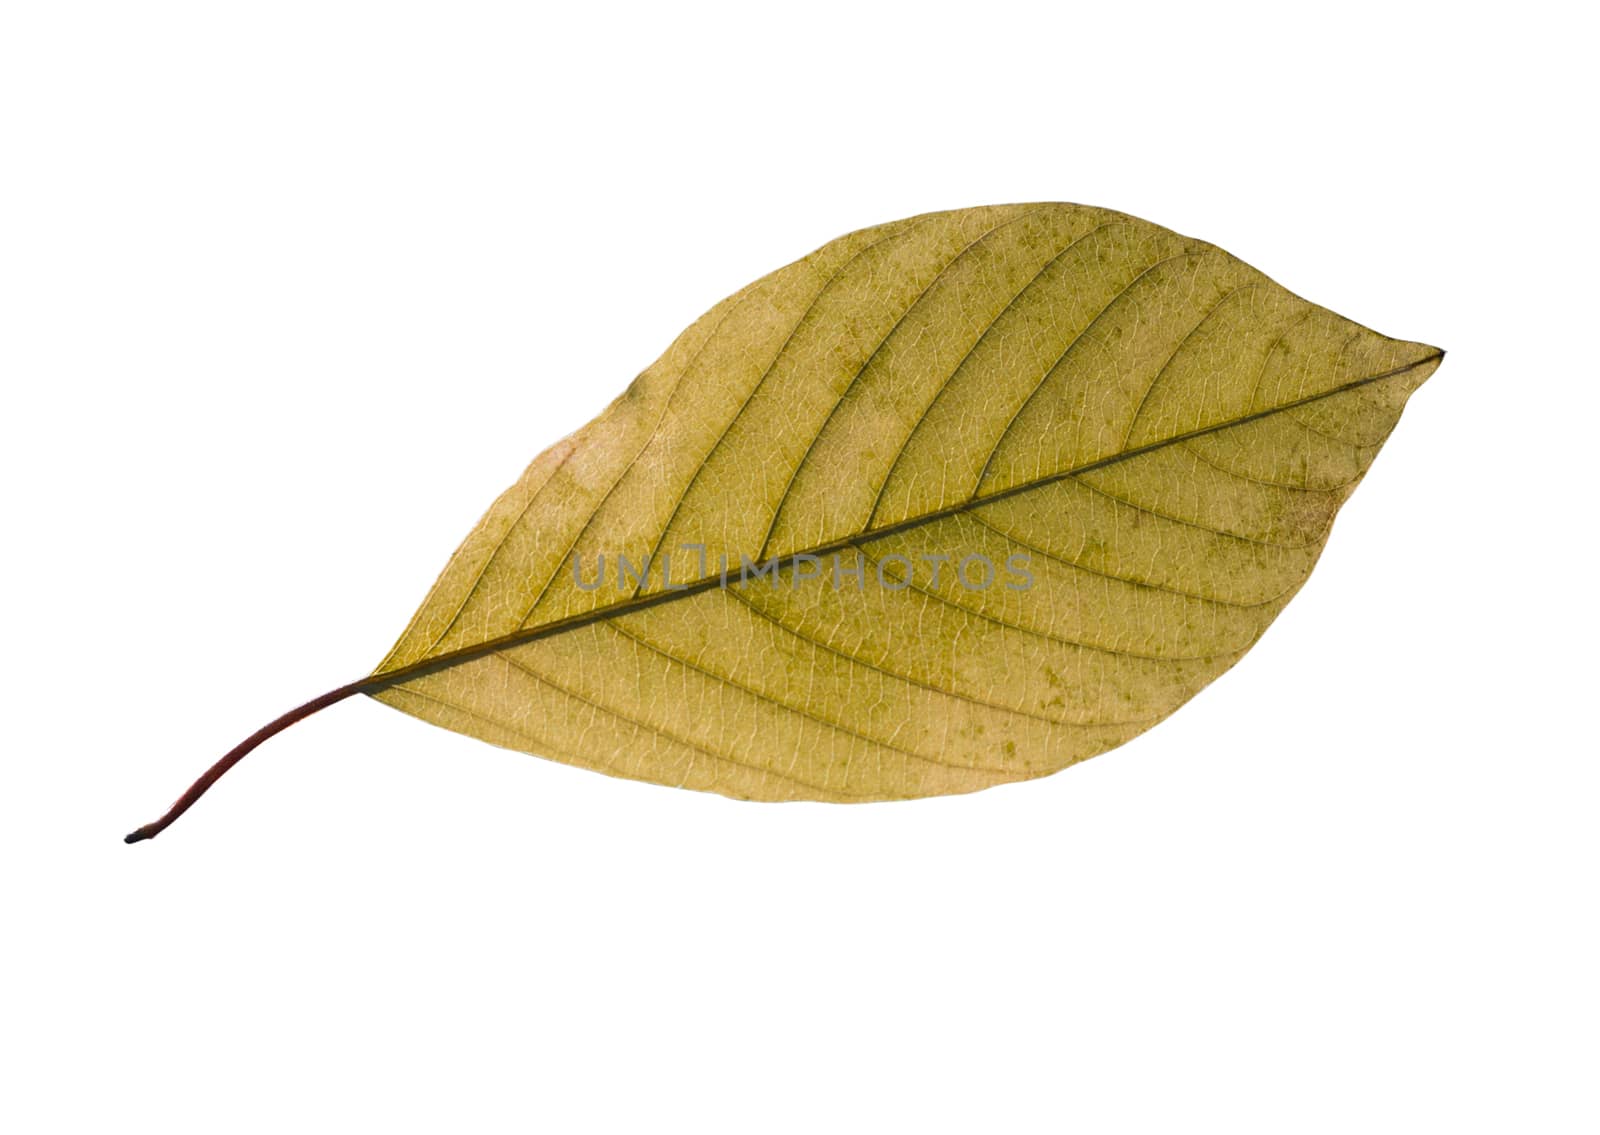 birch leaf isolated on white background by aarrows